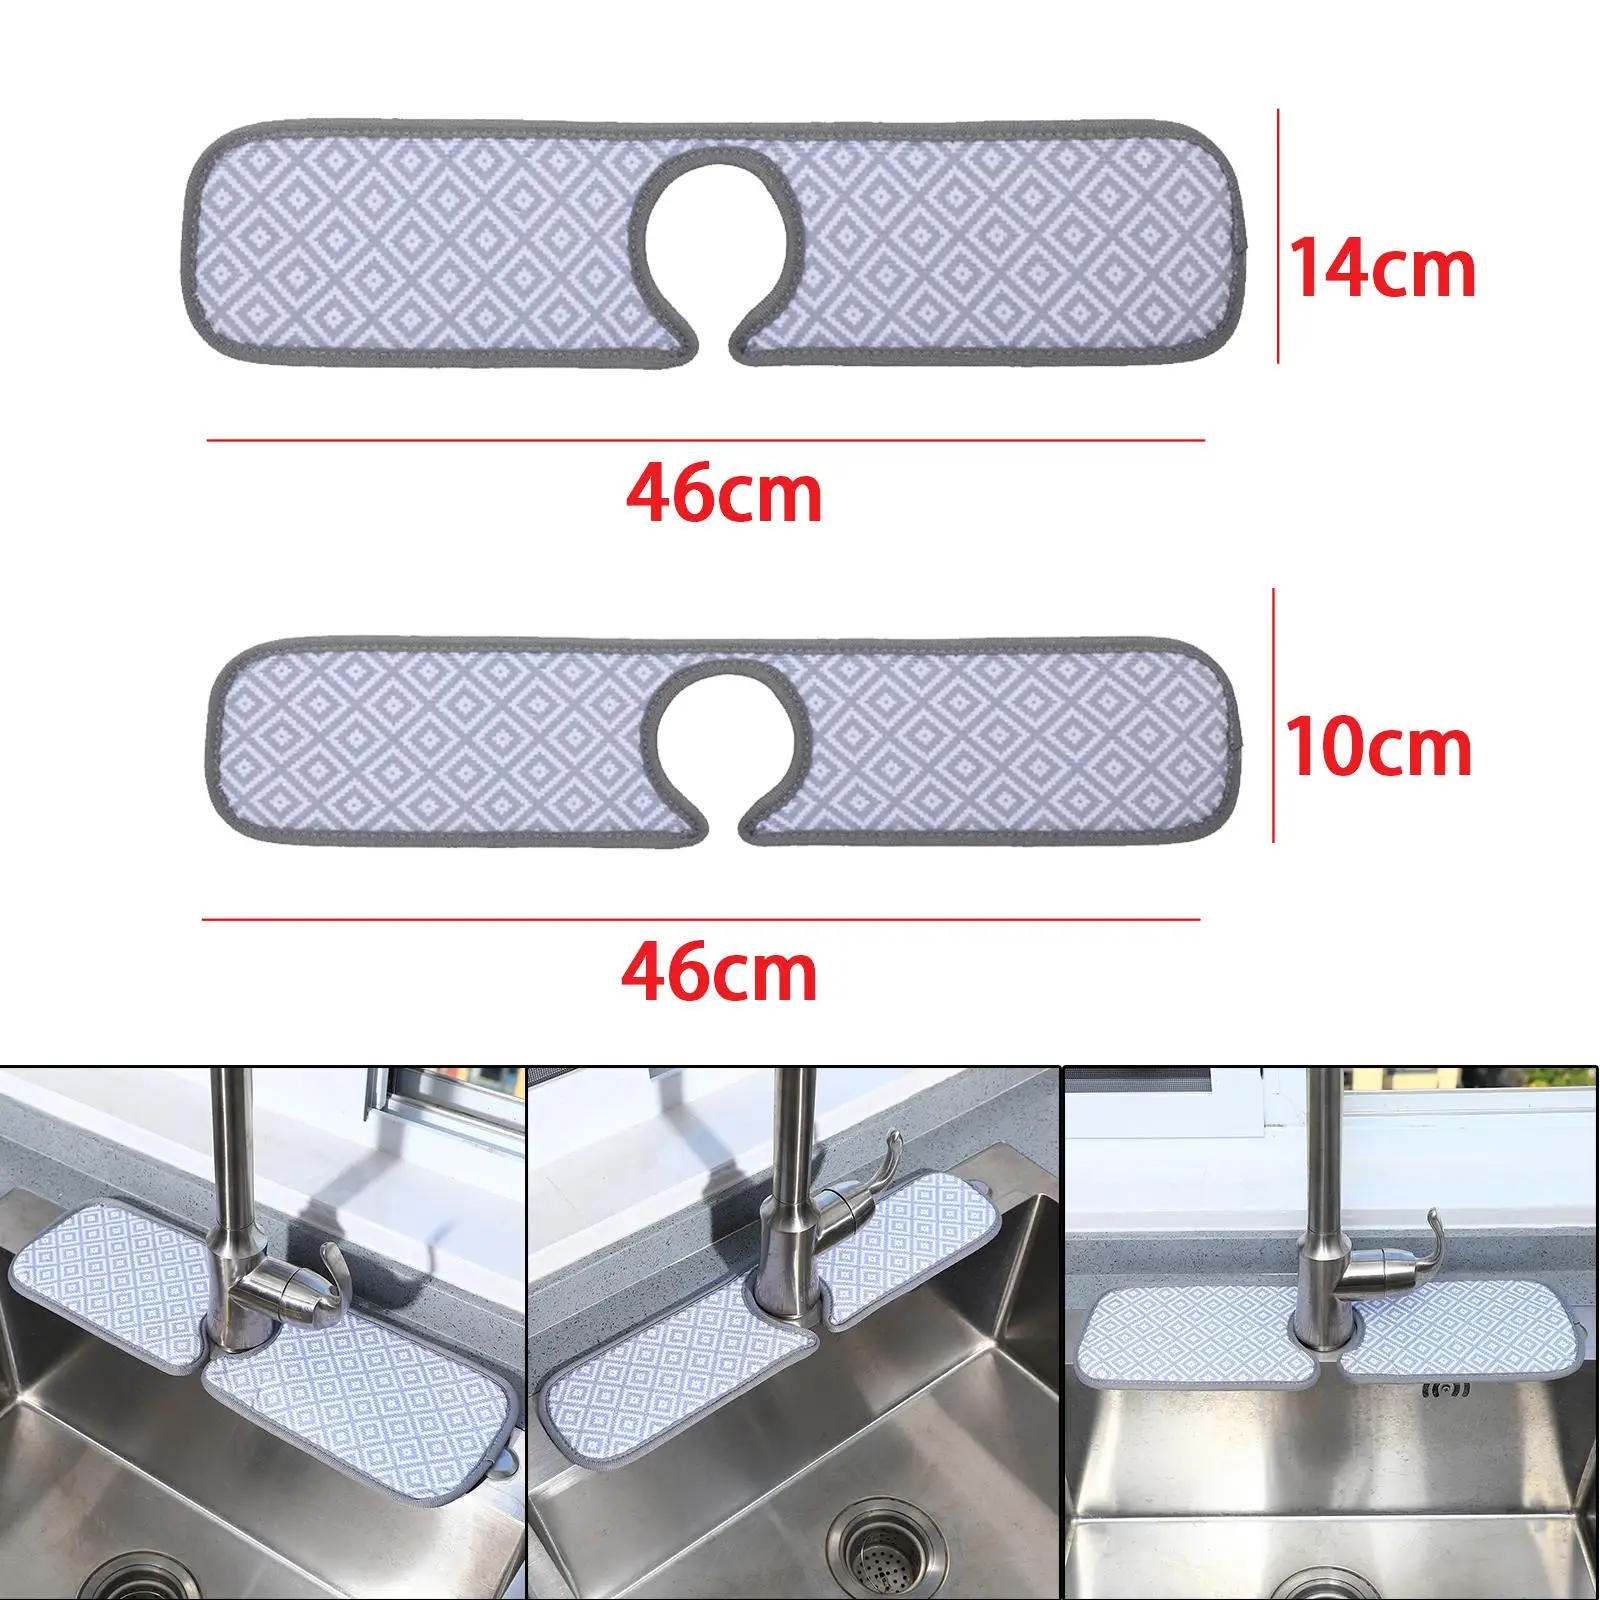 Faucet Wrap Around Mat Sink Drying Mat Drip and Easy to Use